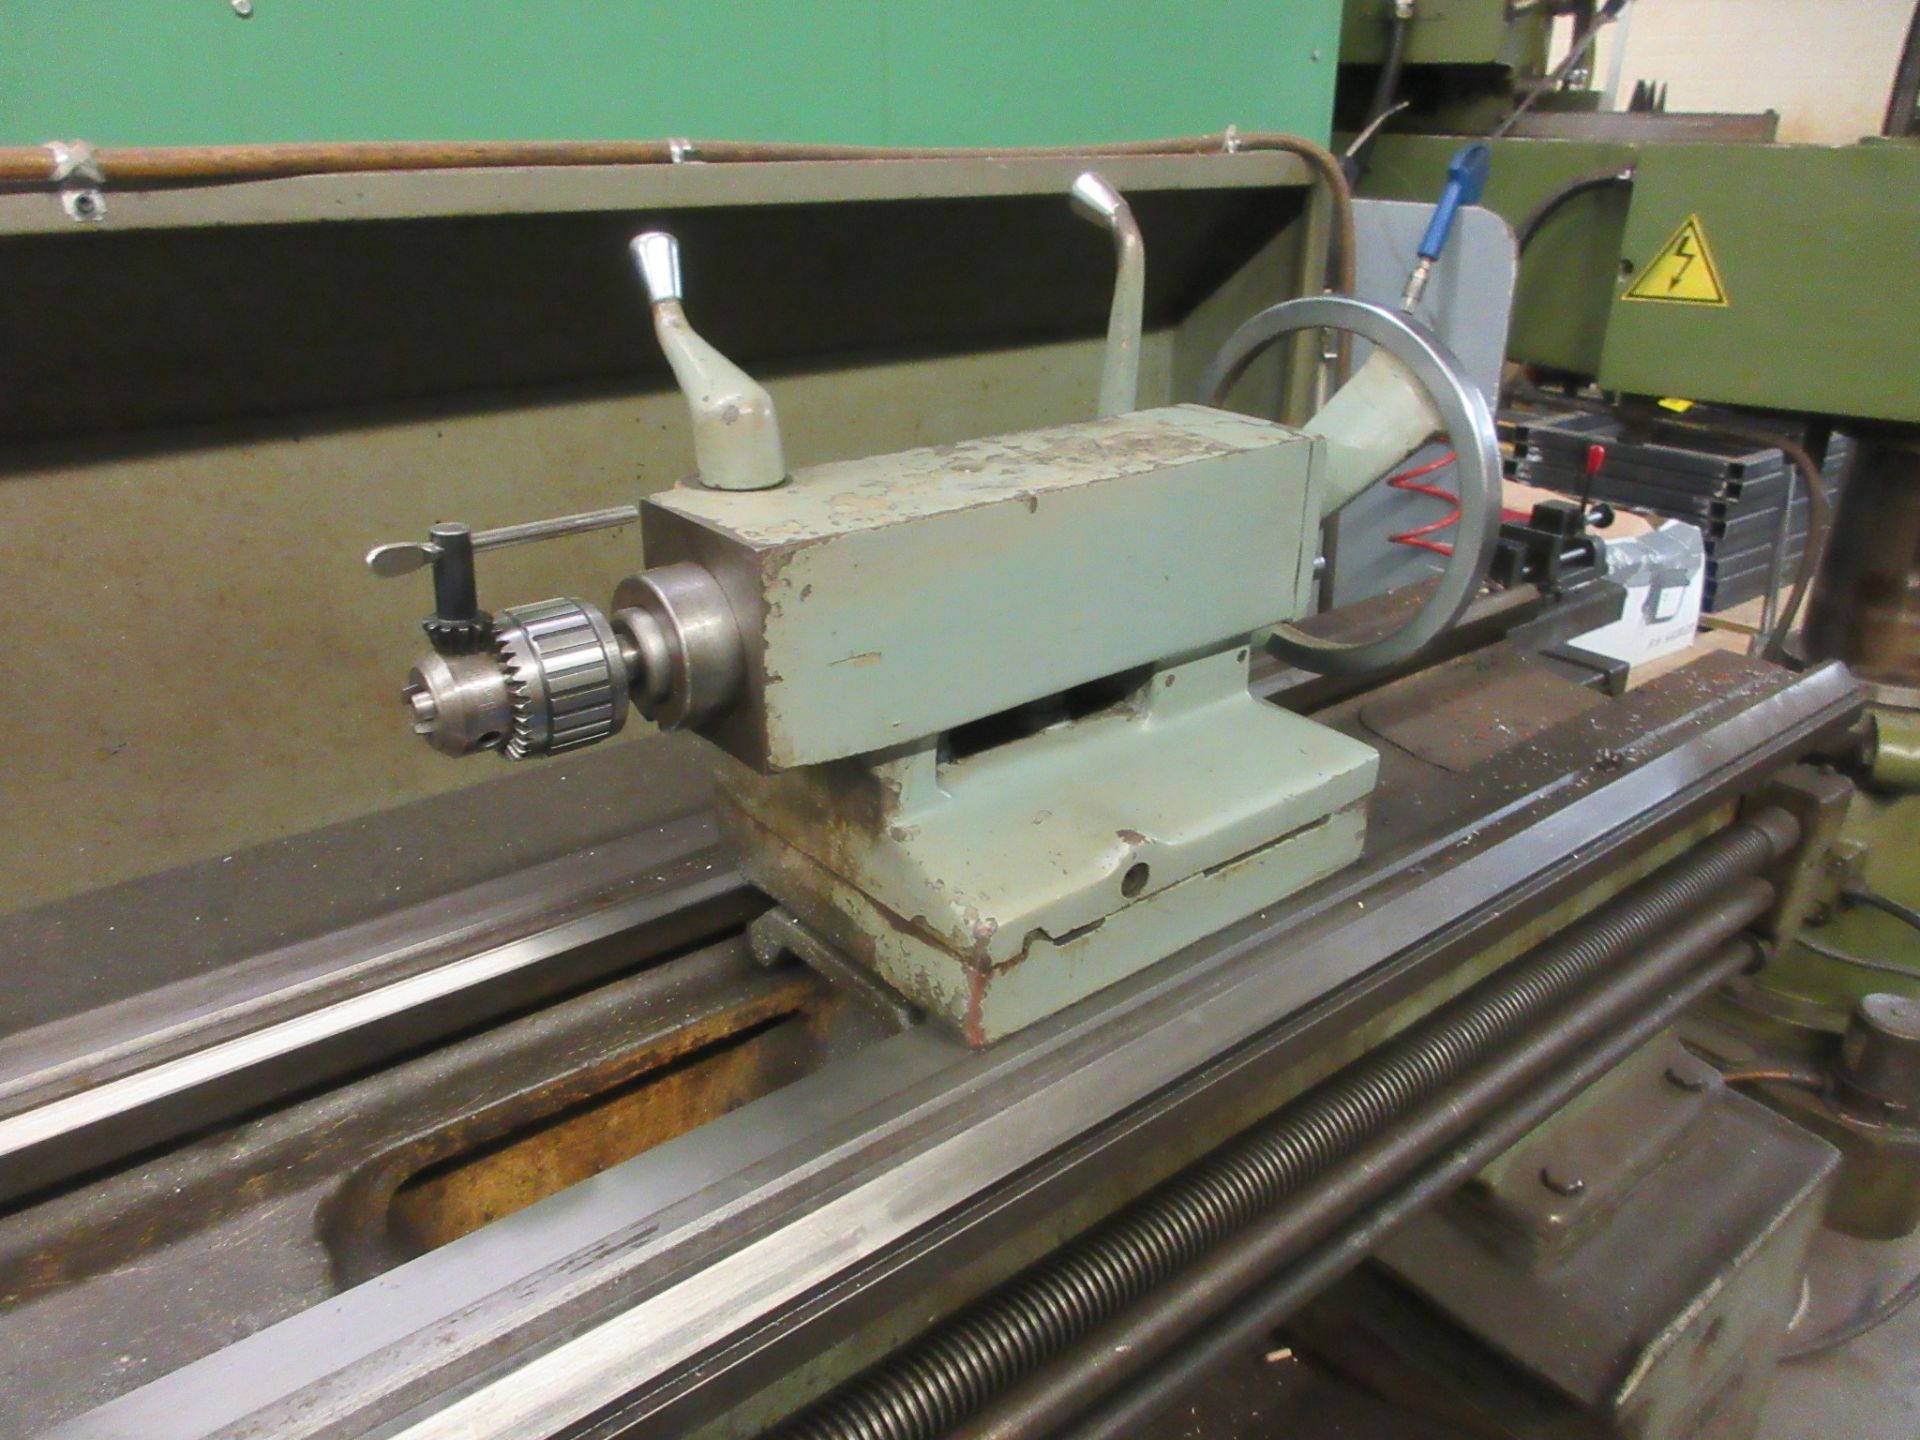 GWM S1 LATHE, 12” 3-JAW CHUCK, 20” SWING, 80” BED, 65” BETWEEN CENTERS, TAILSTOCK, TOOL POST, SPEEDS - Image 14 of 17